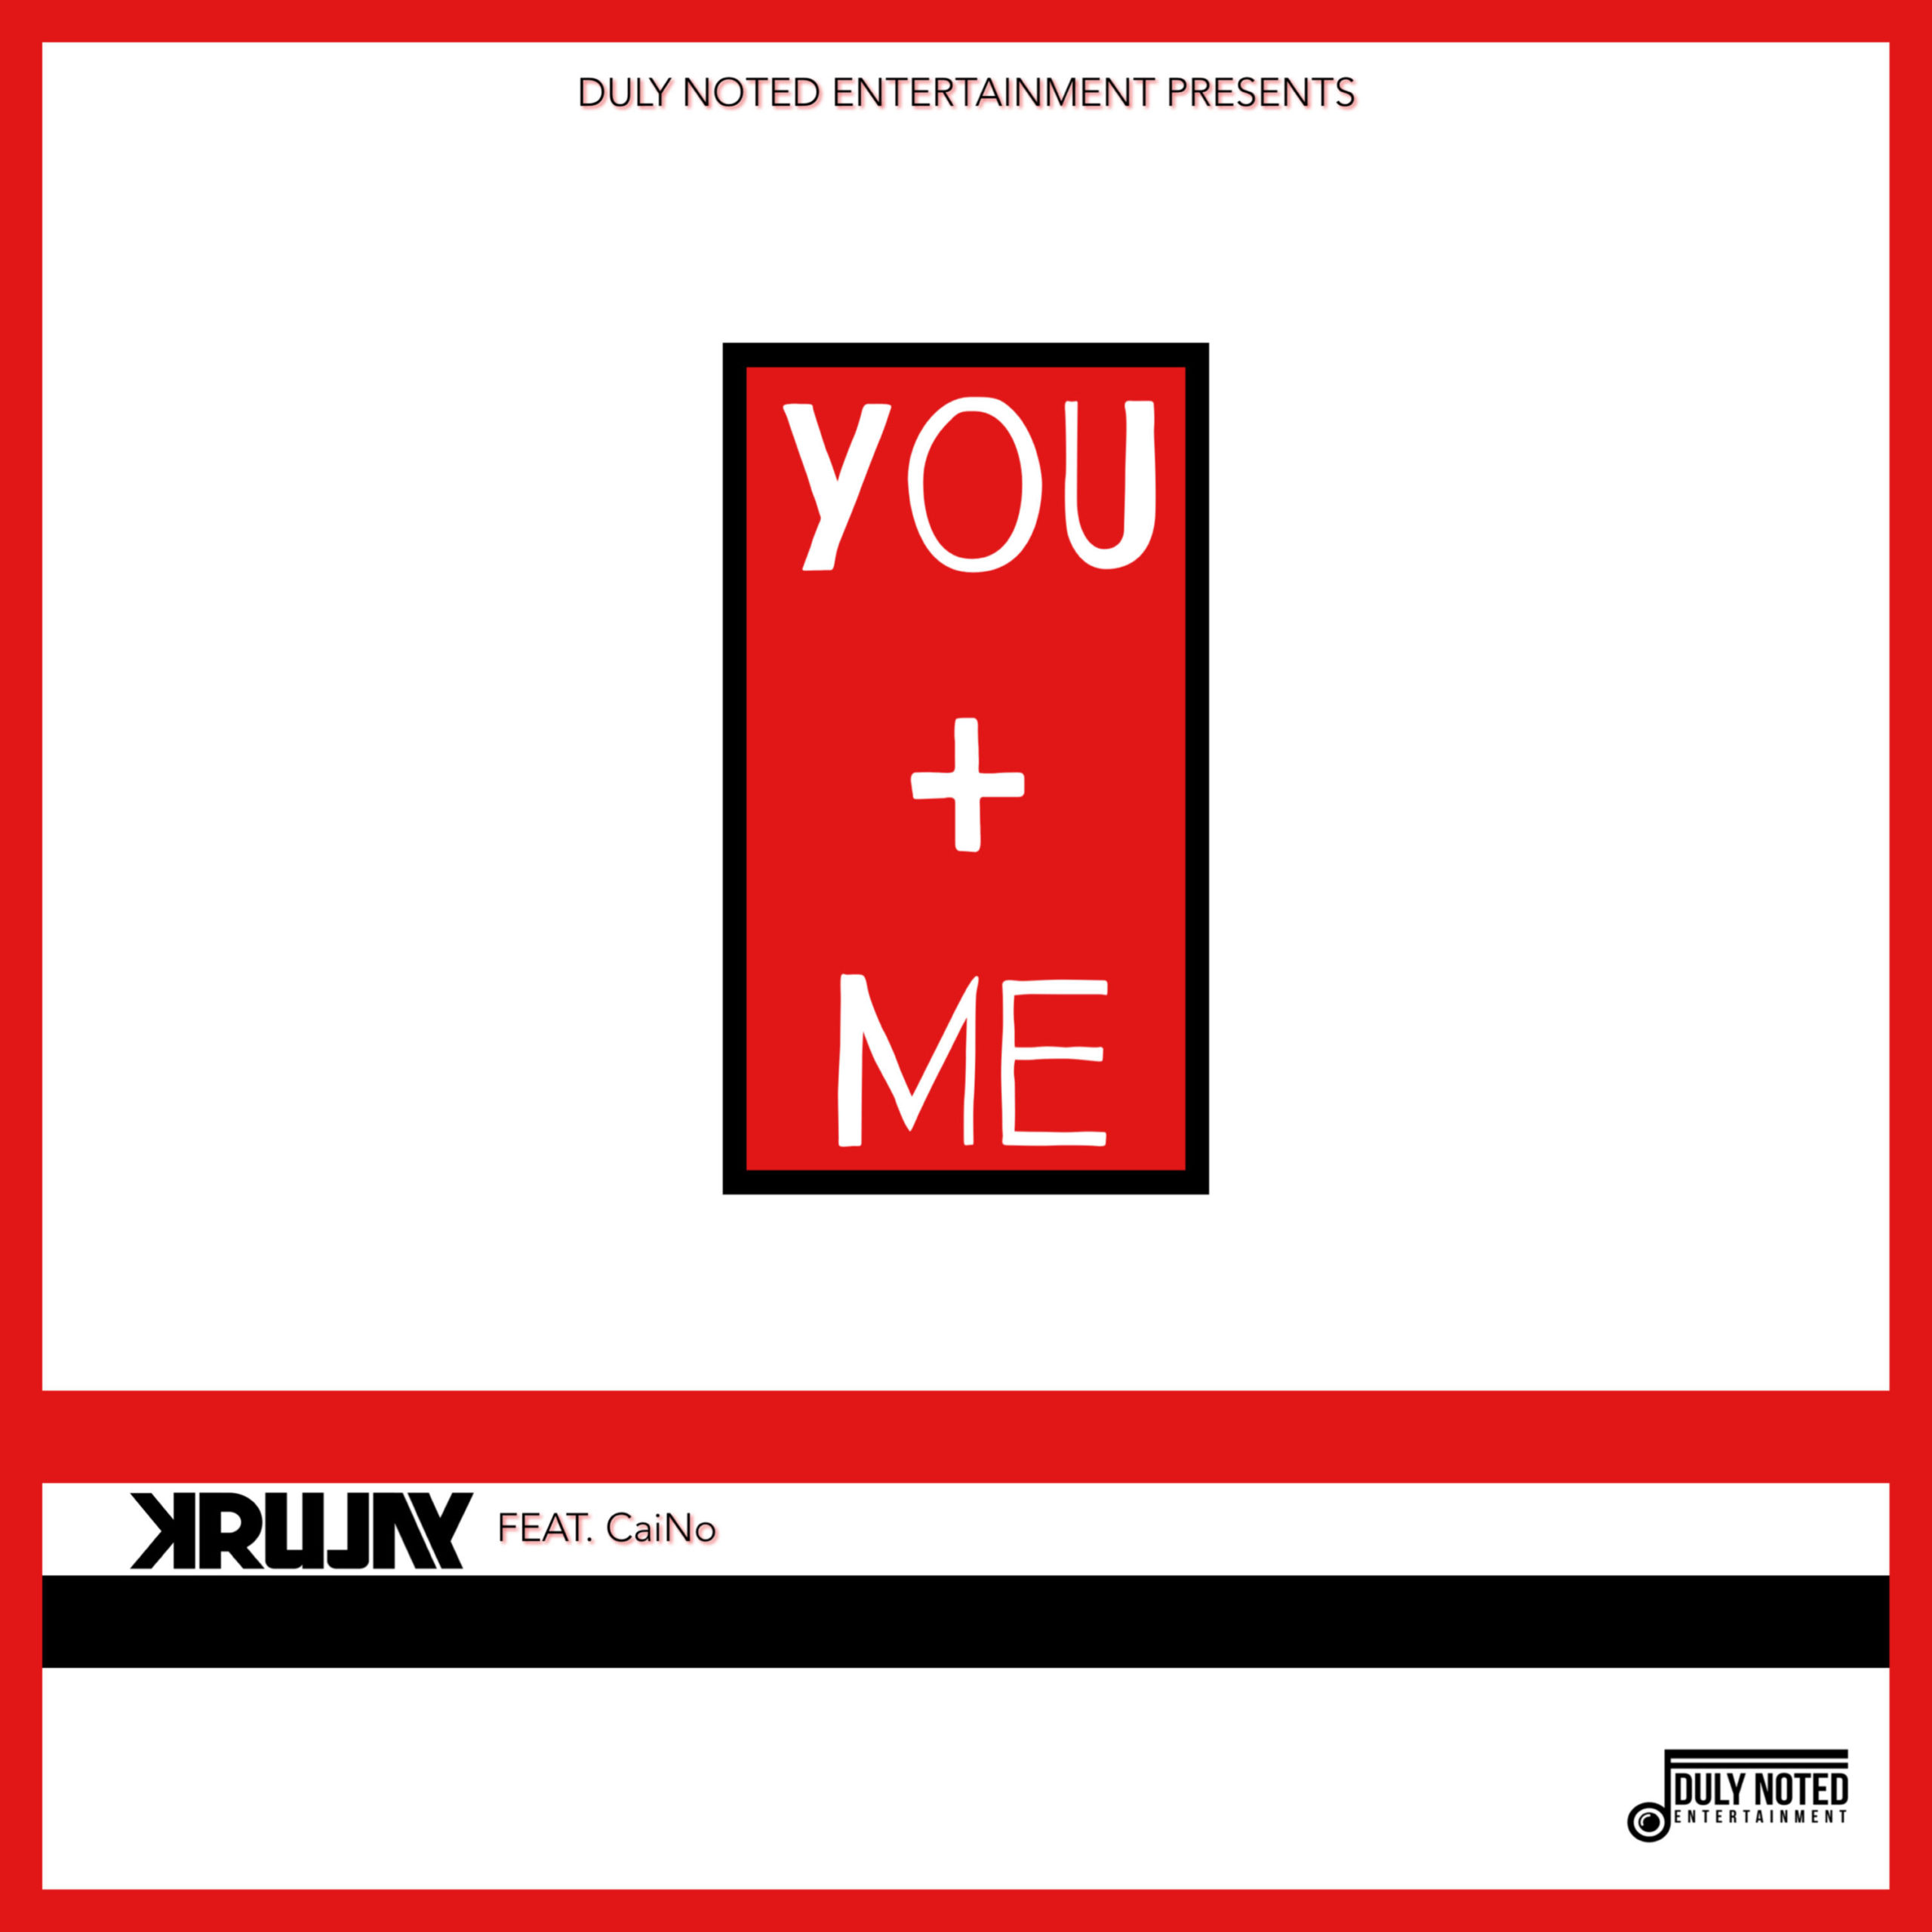 Krujay is back with a new tuneful record titled You + Me